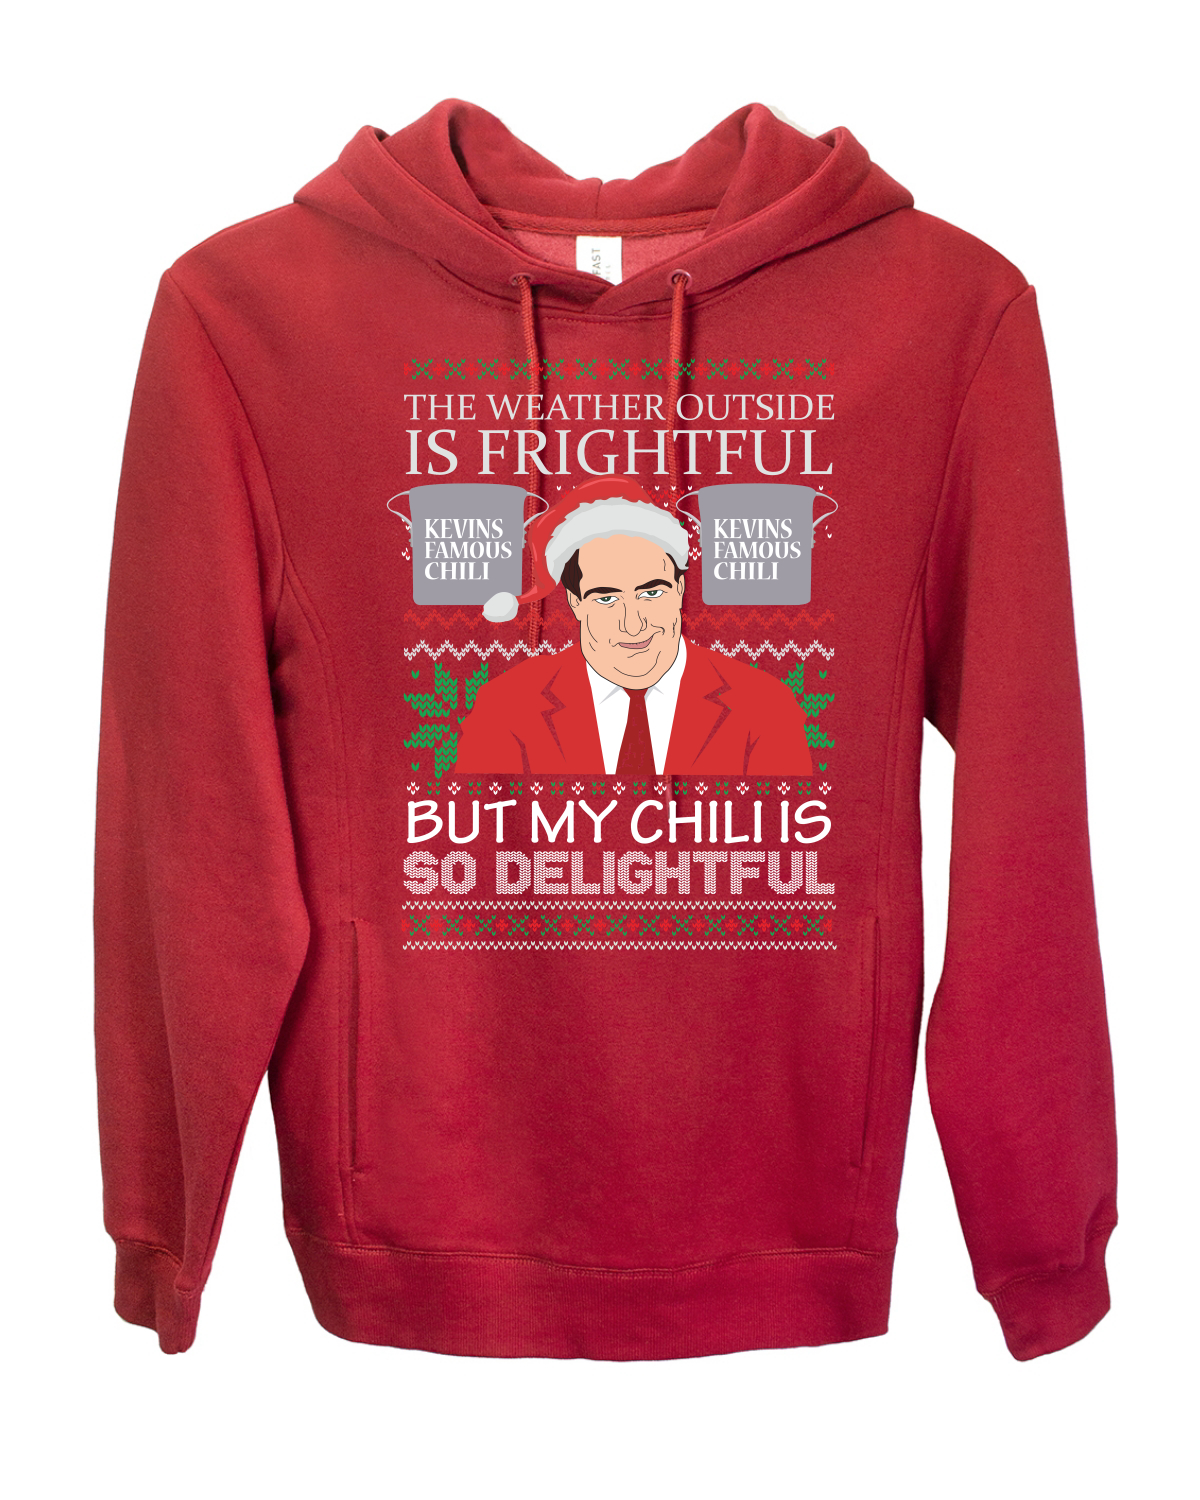 Kevin's Famous Chili is So Delightful Xmas Ugly Christmas Sweater Premium Graphic Hoodie Sweatshirt, Red, Large - image 2 of 3